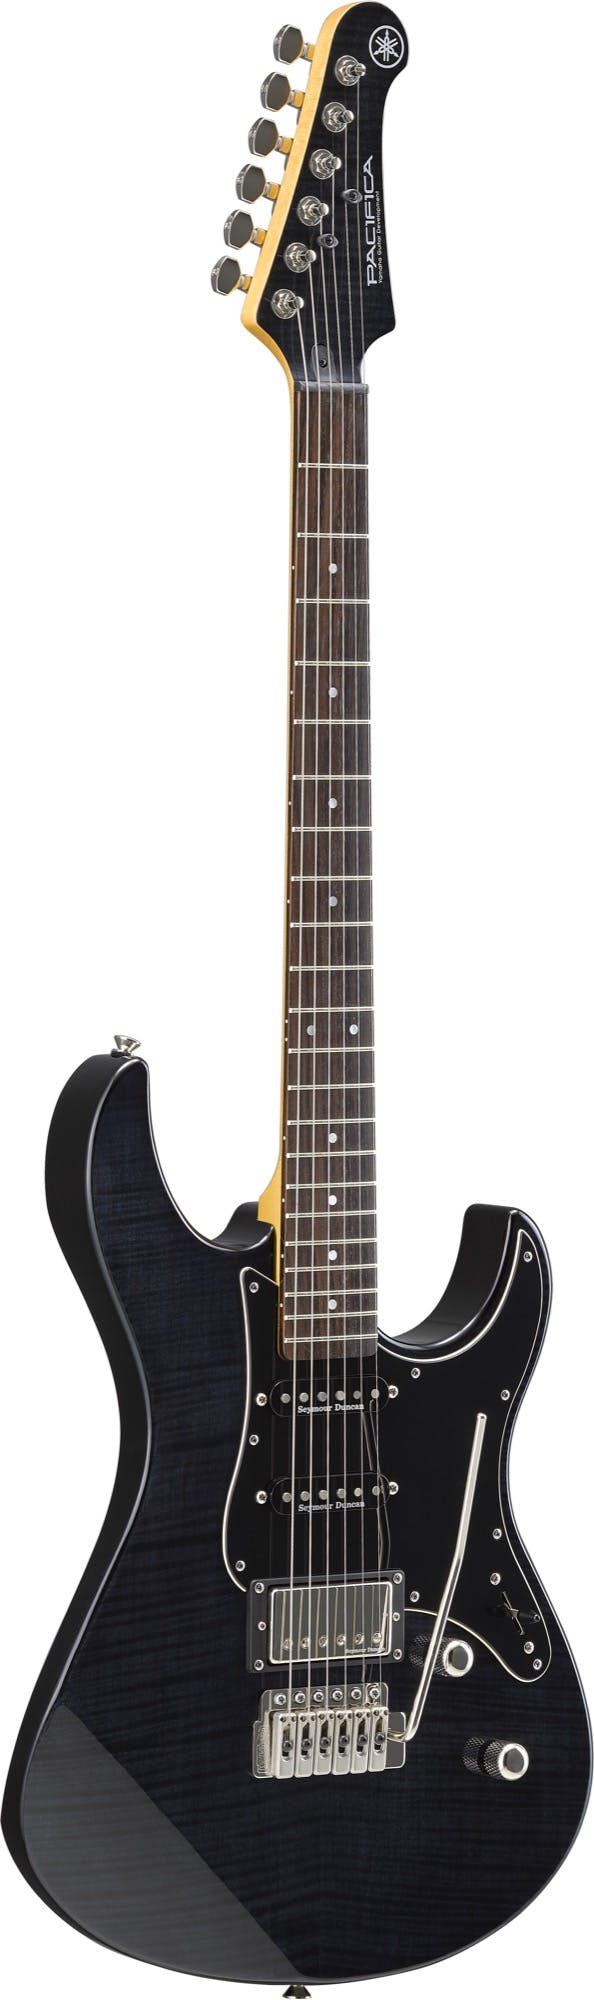 Yamaha Pacifica 612V FM MK II Electric Guitar In Trans Black with Flamed  Maple Top - Andertons Music Co.